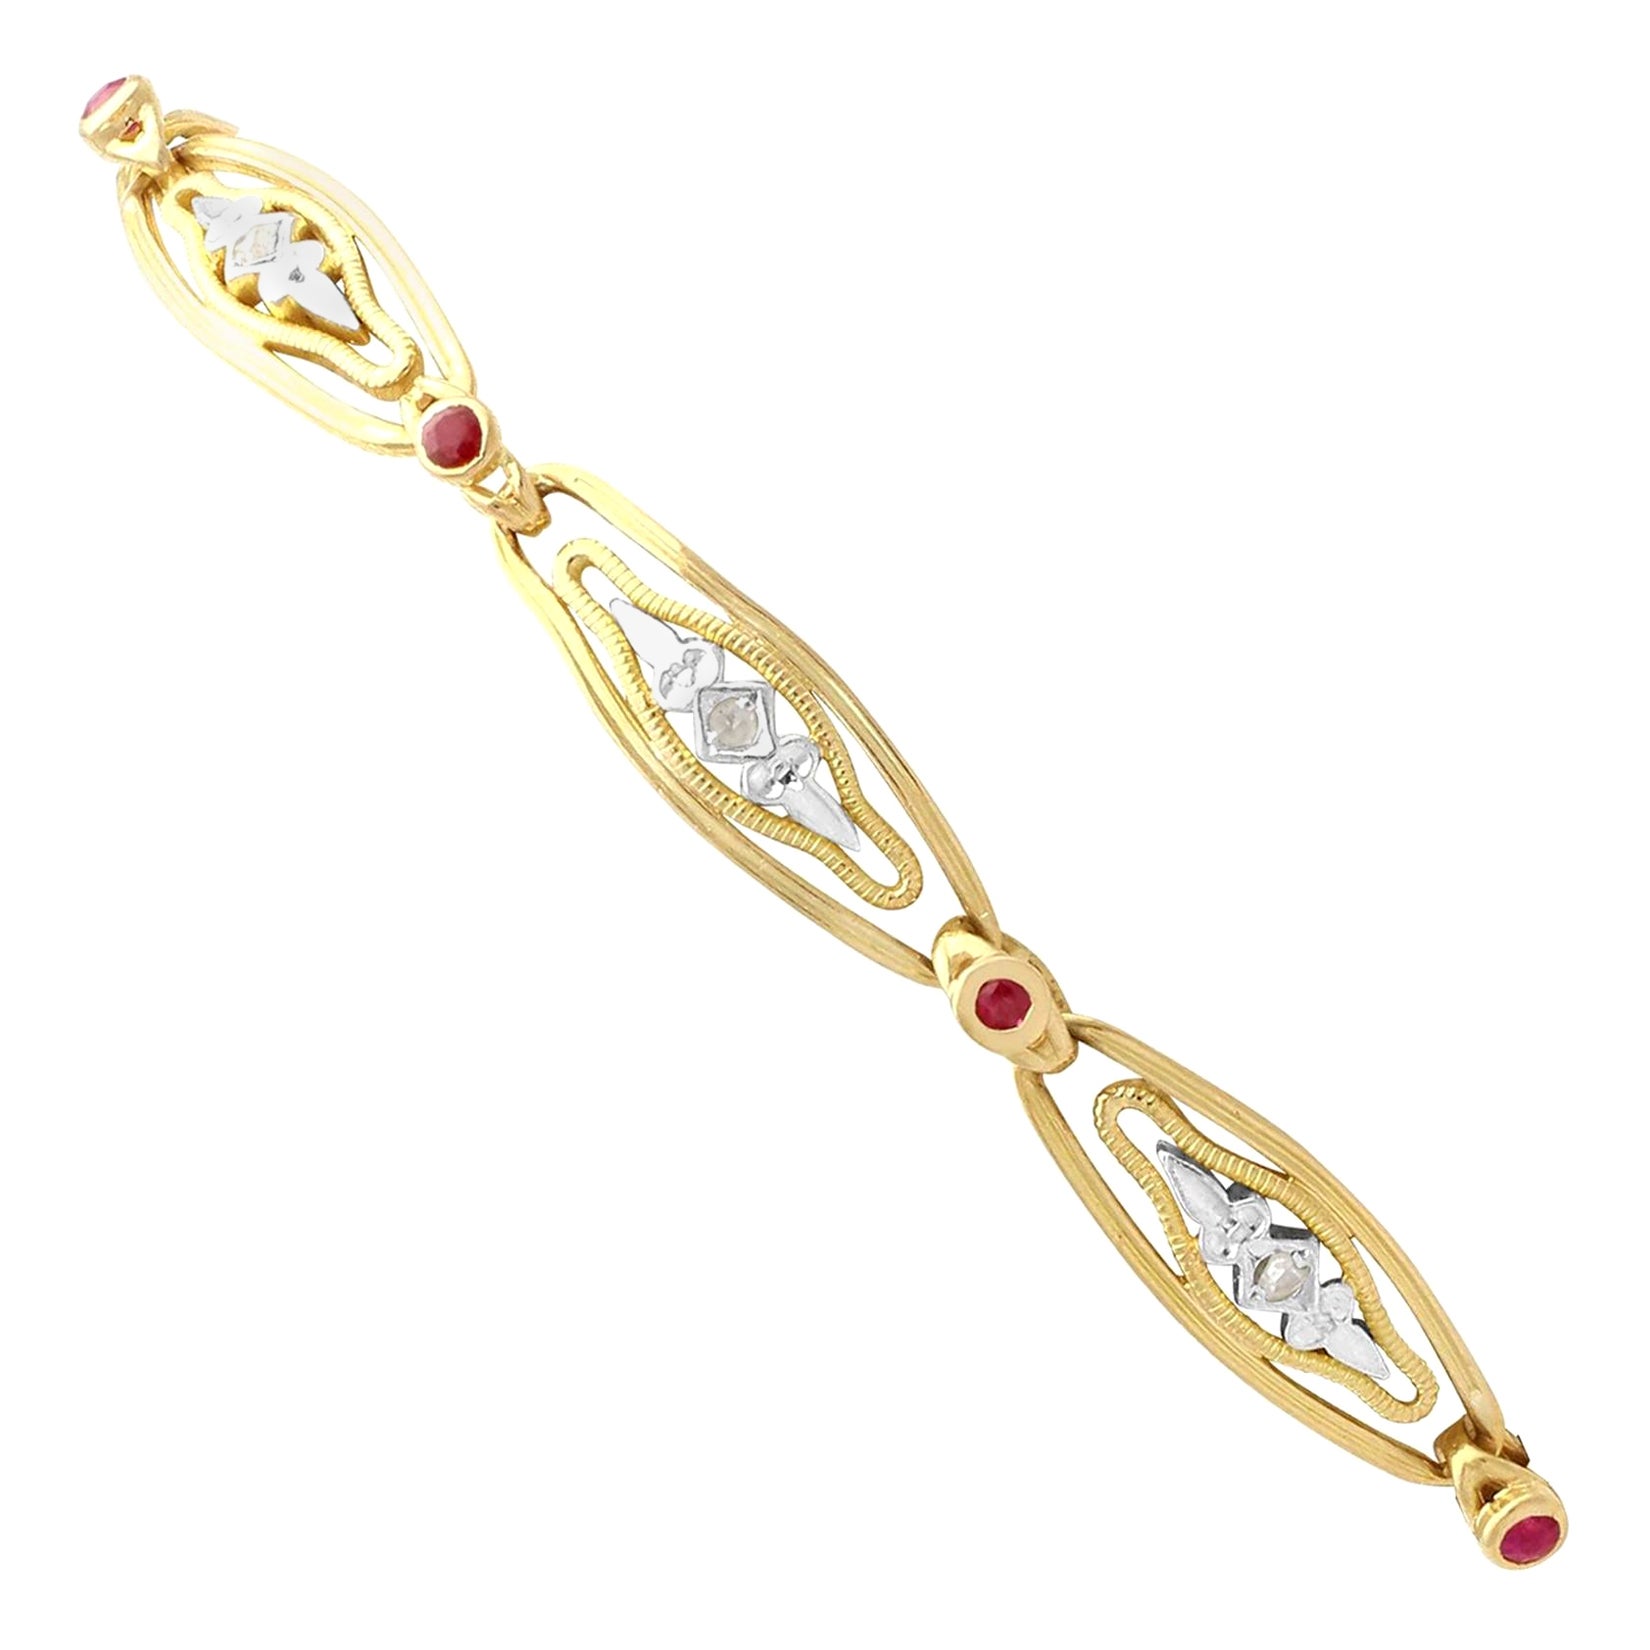 An impressive vintage French 0.21 carat ruby and 0.08 carat diamond, 18 karat yellow and white gold bracelet; part of our diverse ruby jewelry collections.

This fine and impressive gold bracelet has been crafted in 18k yellow gold with 18k white